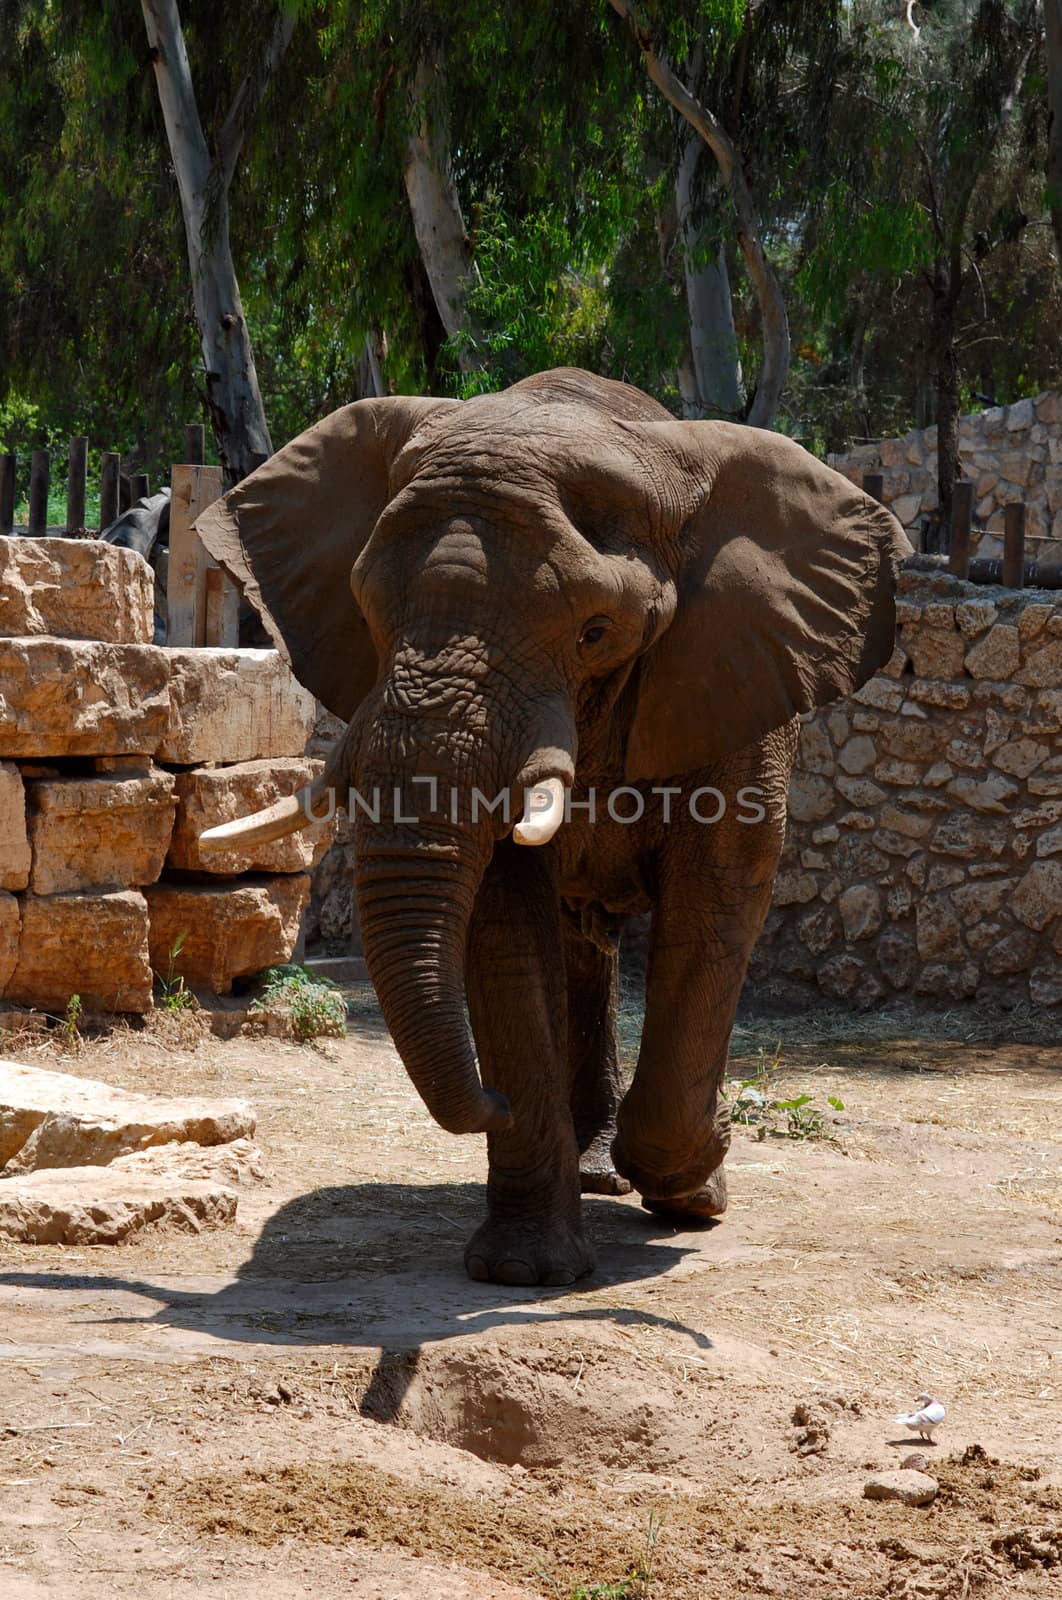 The world's largest elephant living at the zoo